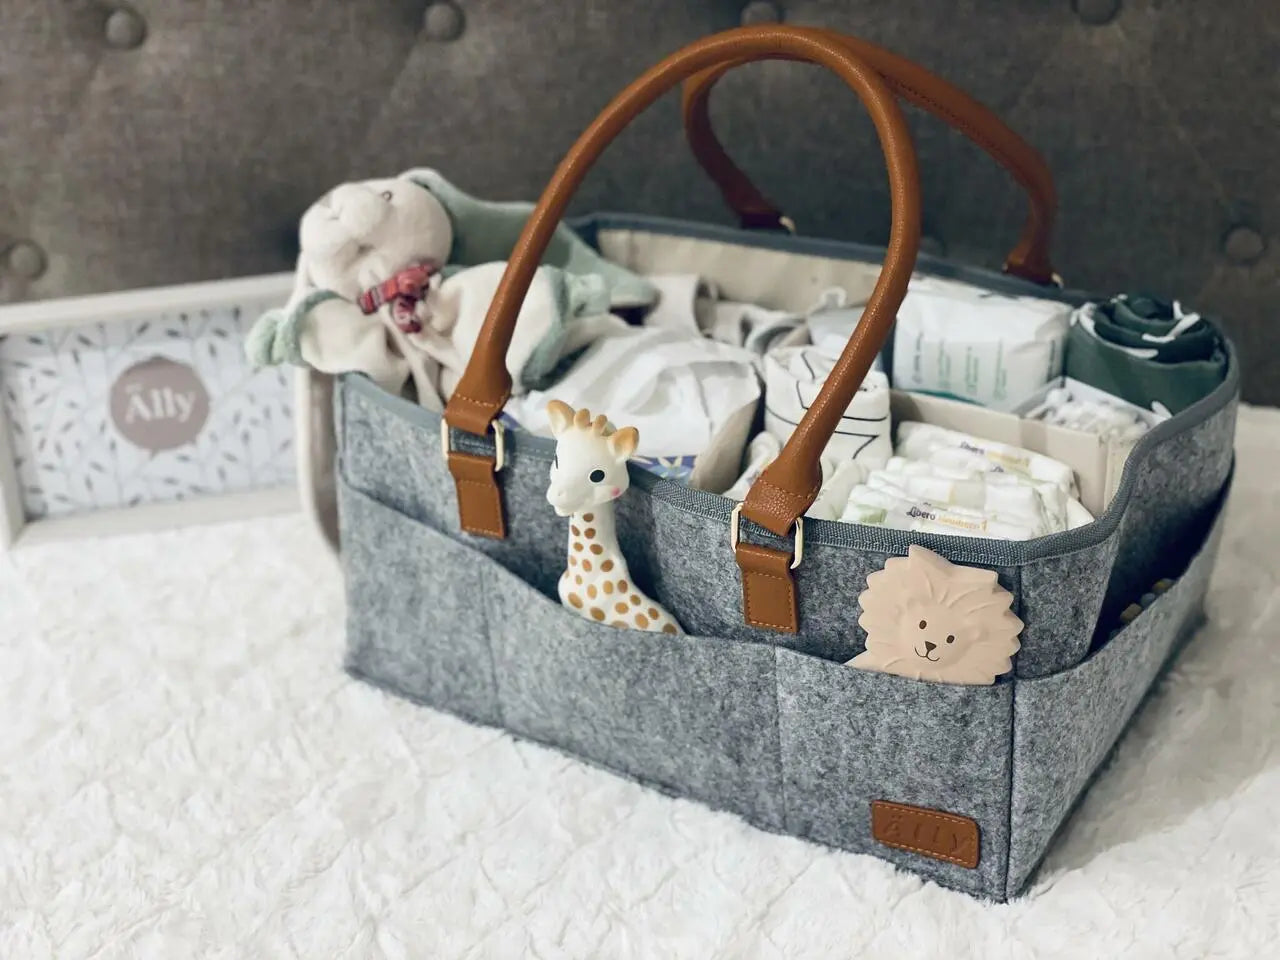 A handbag-style Storage Basket / Diaper Caddy Organizer with multiple pockets and customizable partitions for baby supplies. Lightweight, durable, and designed in Europe for organized parenting on the go.